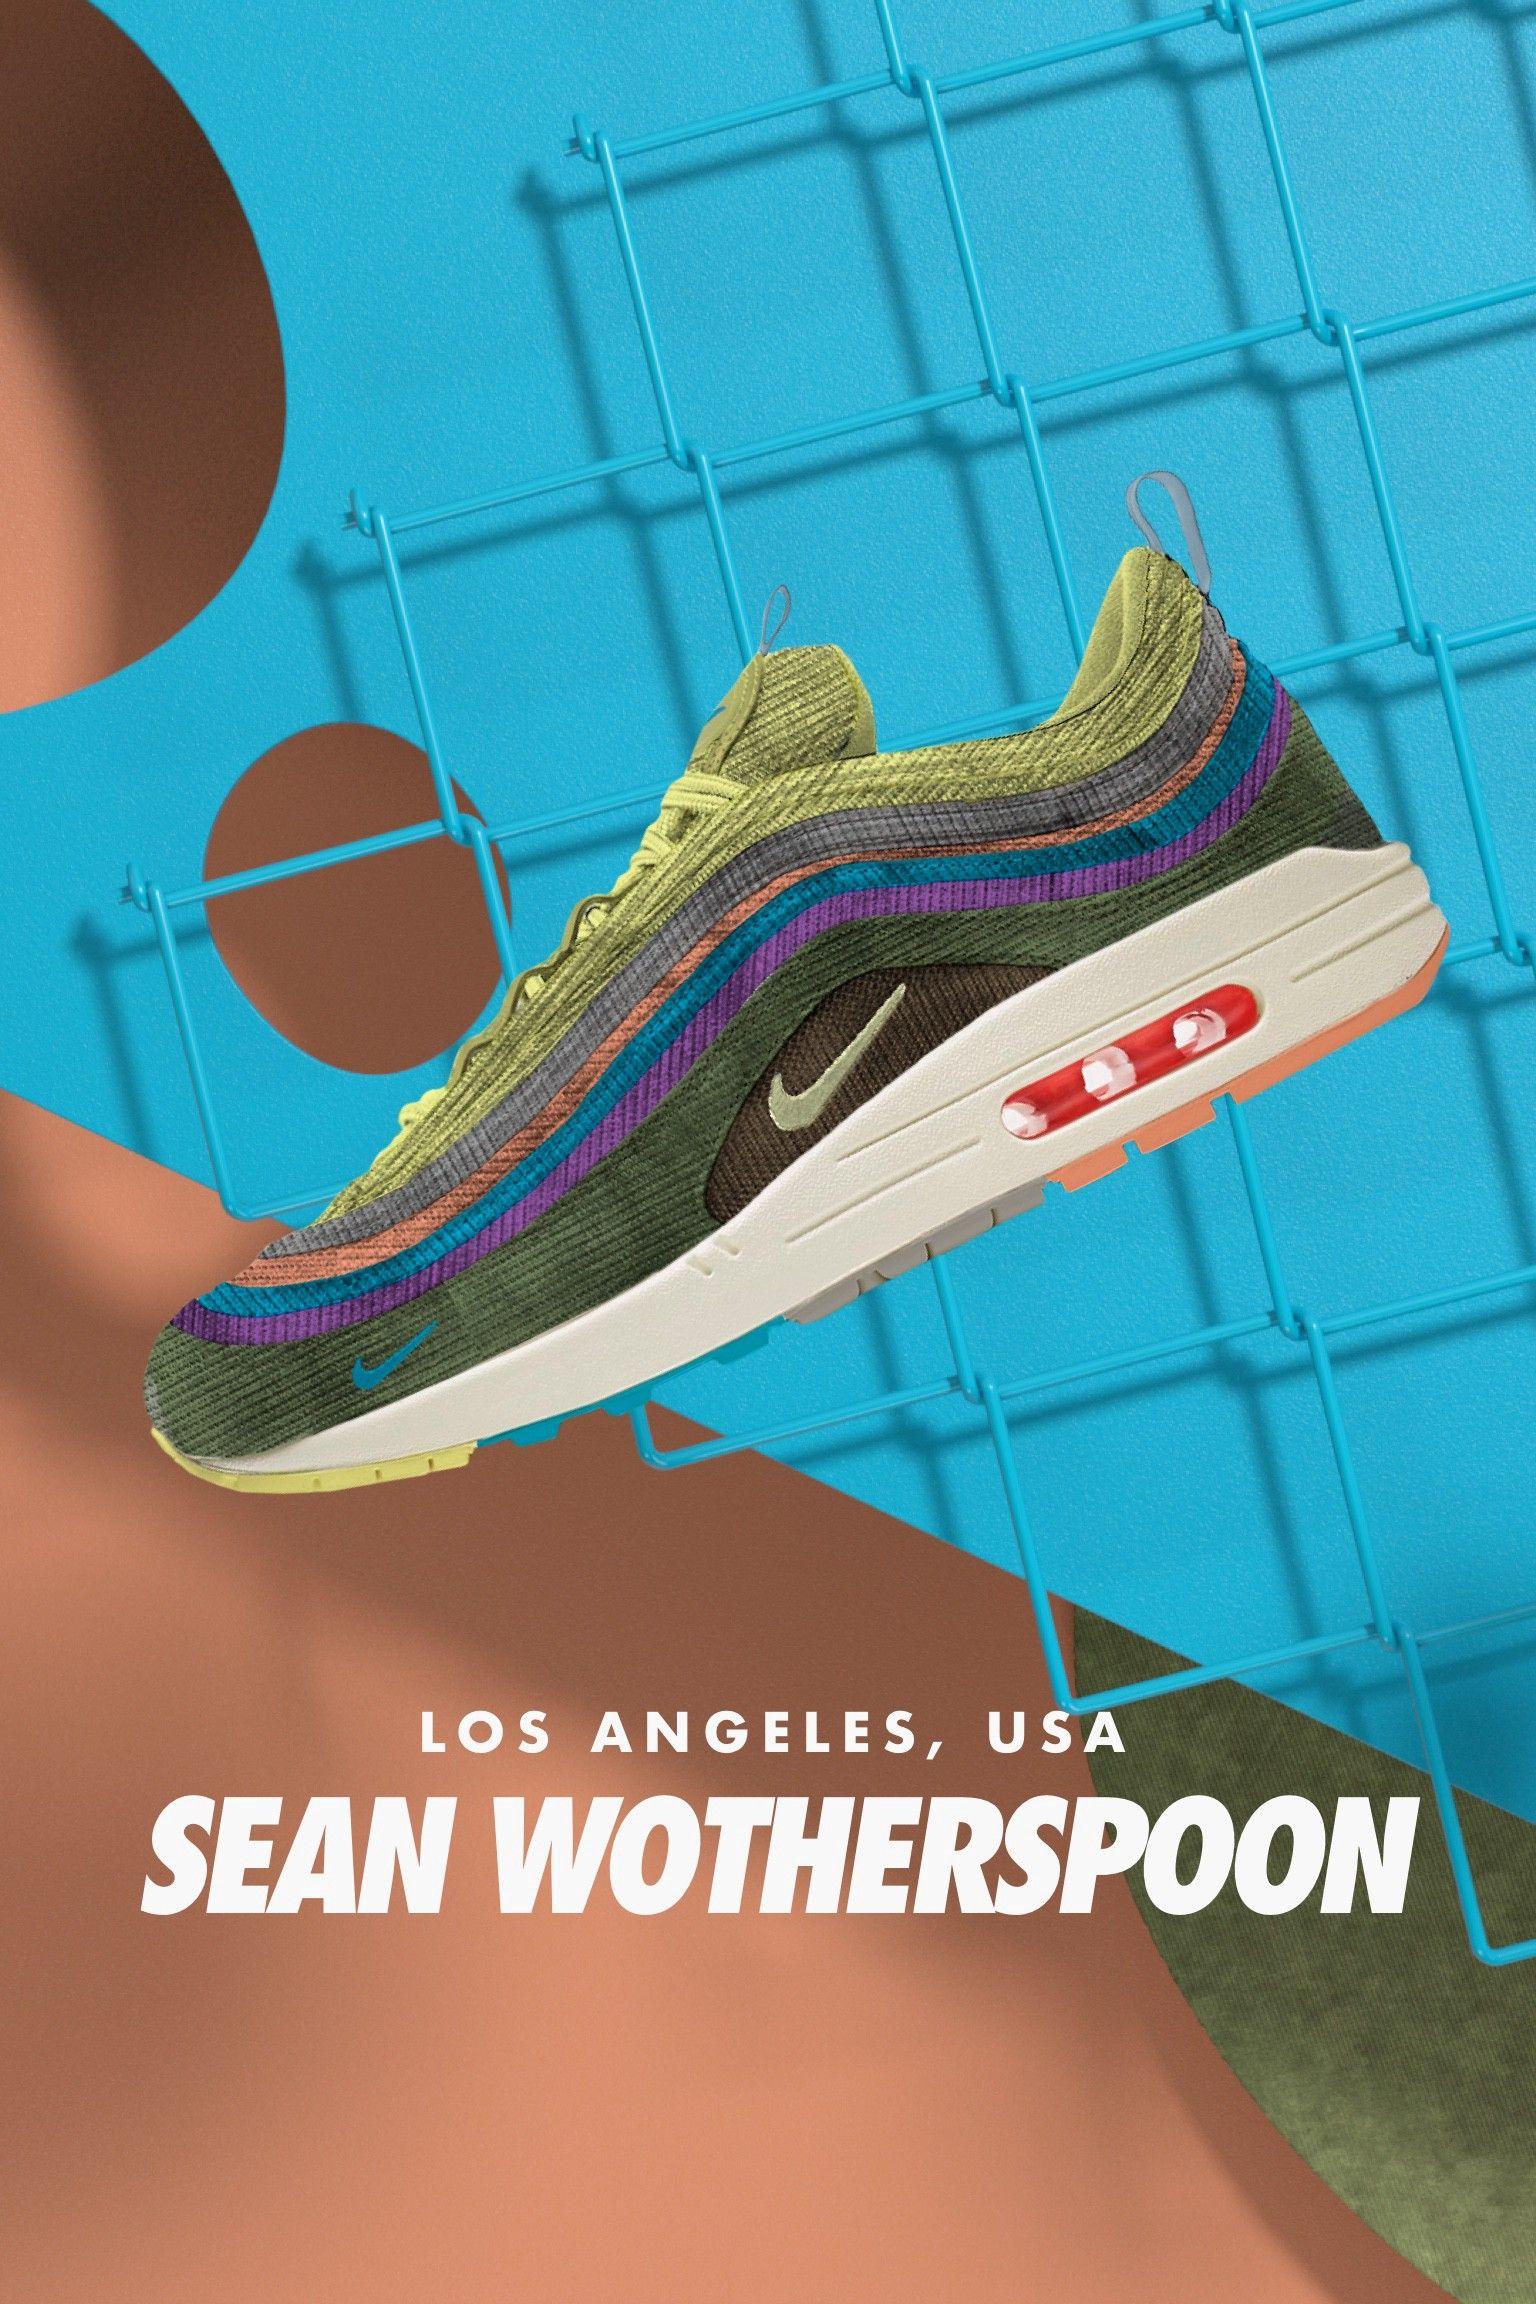 Fade Nike Logo - In Depth Sneaker Review: Nike Air Max 1/97 “Sean Wotherspoon”